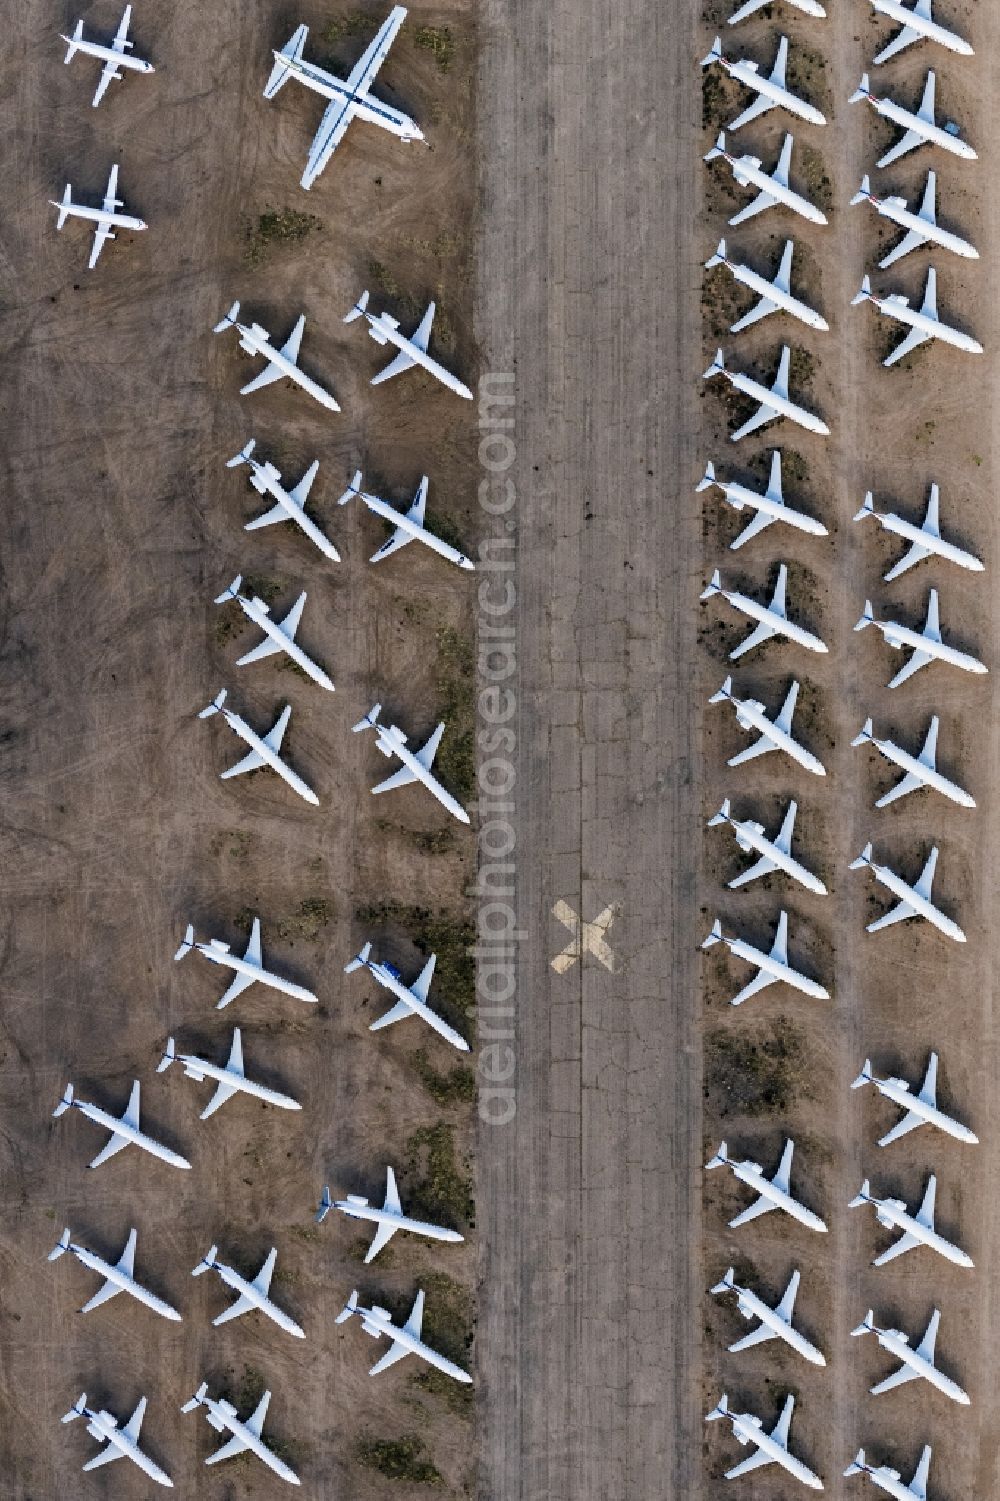 Kingman from above - Passenger planes parked in the aircraft graveyard on racks for recycling and scrapping at Kingman Airport in Arizona, USA